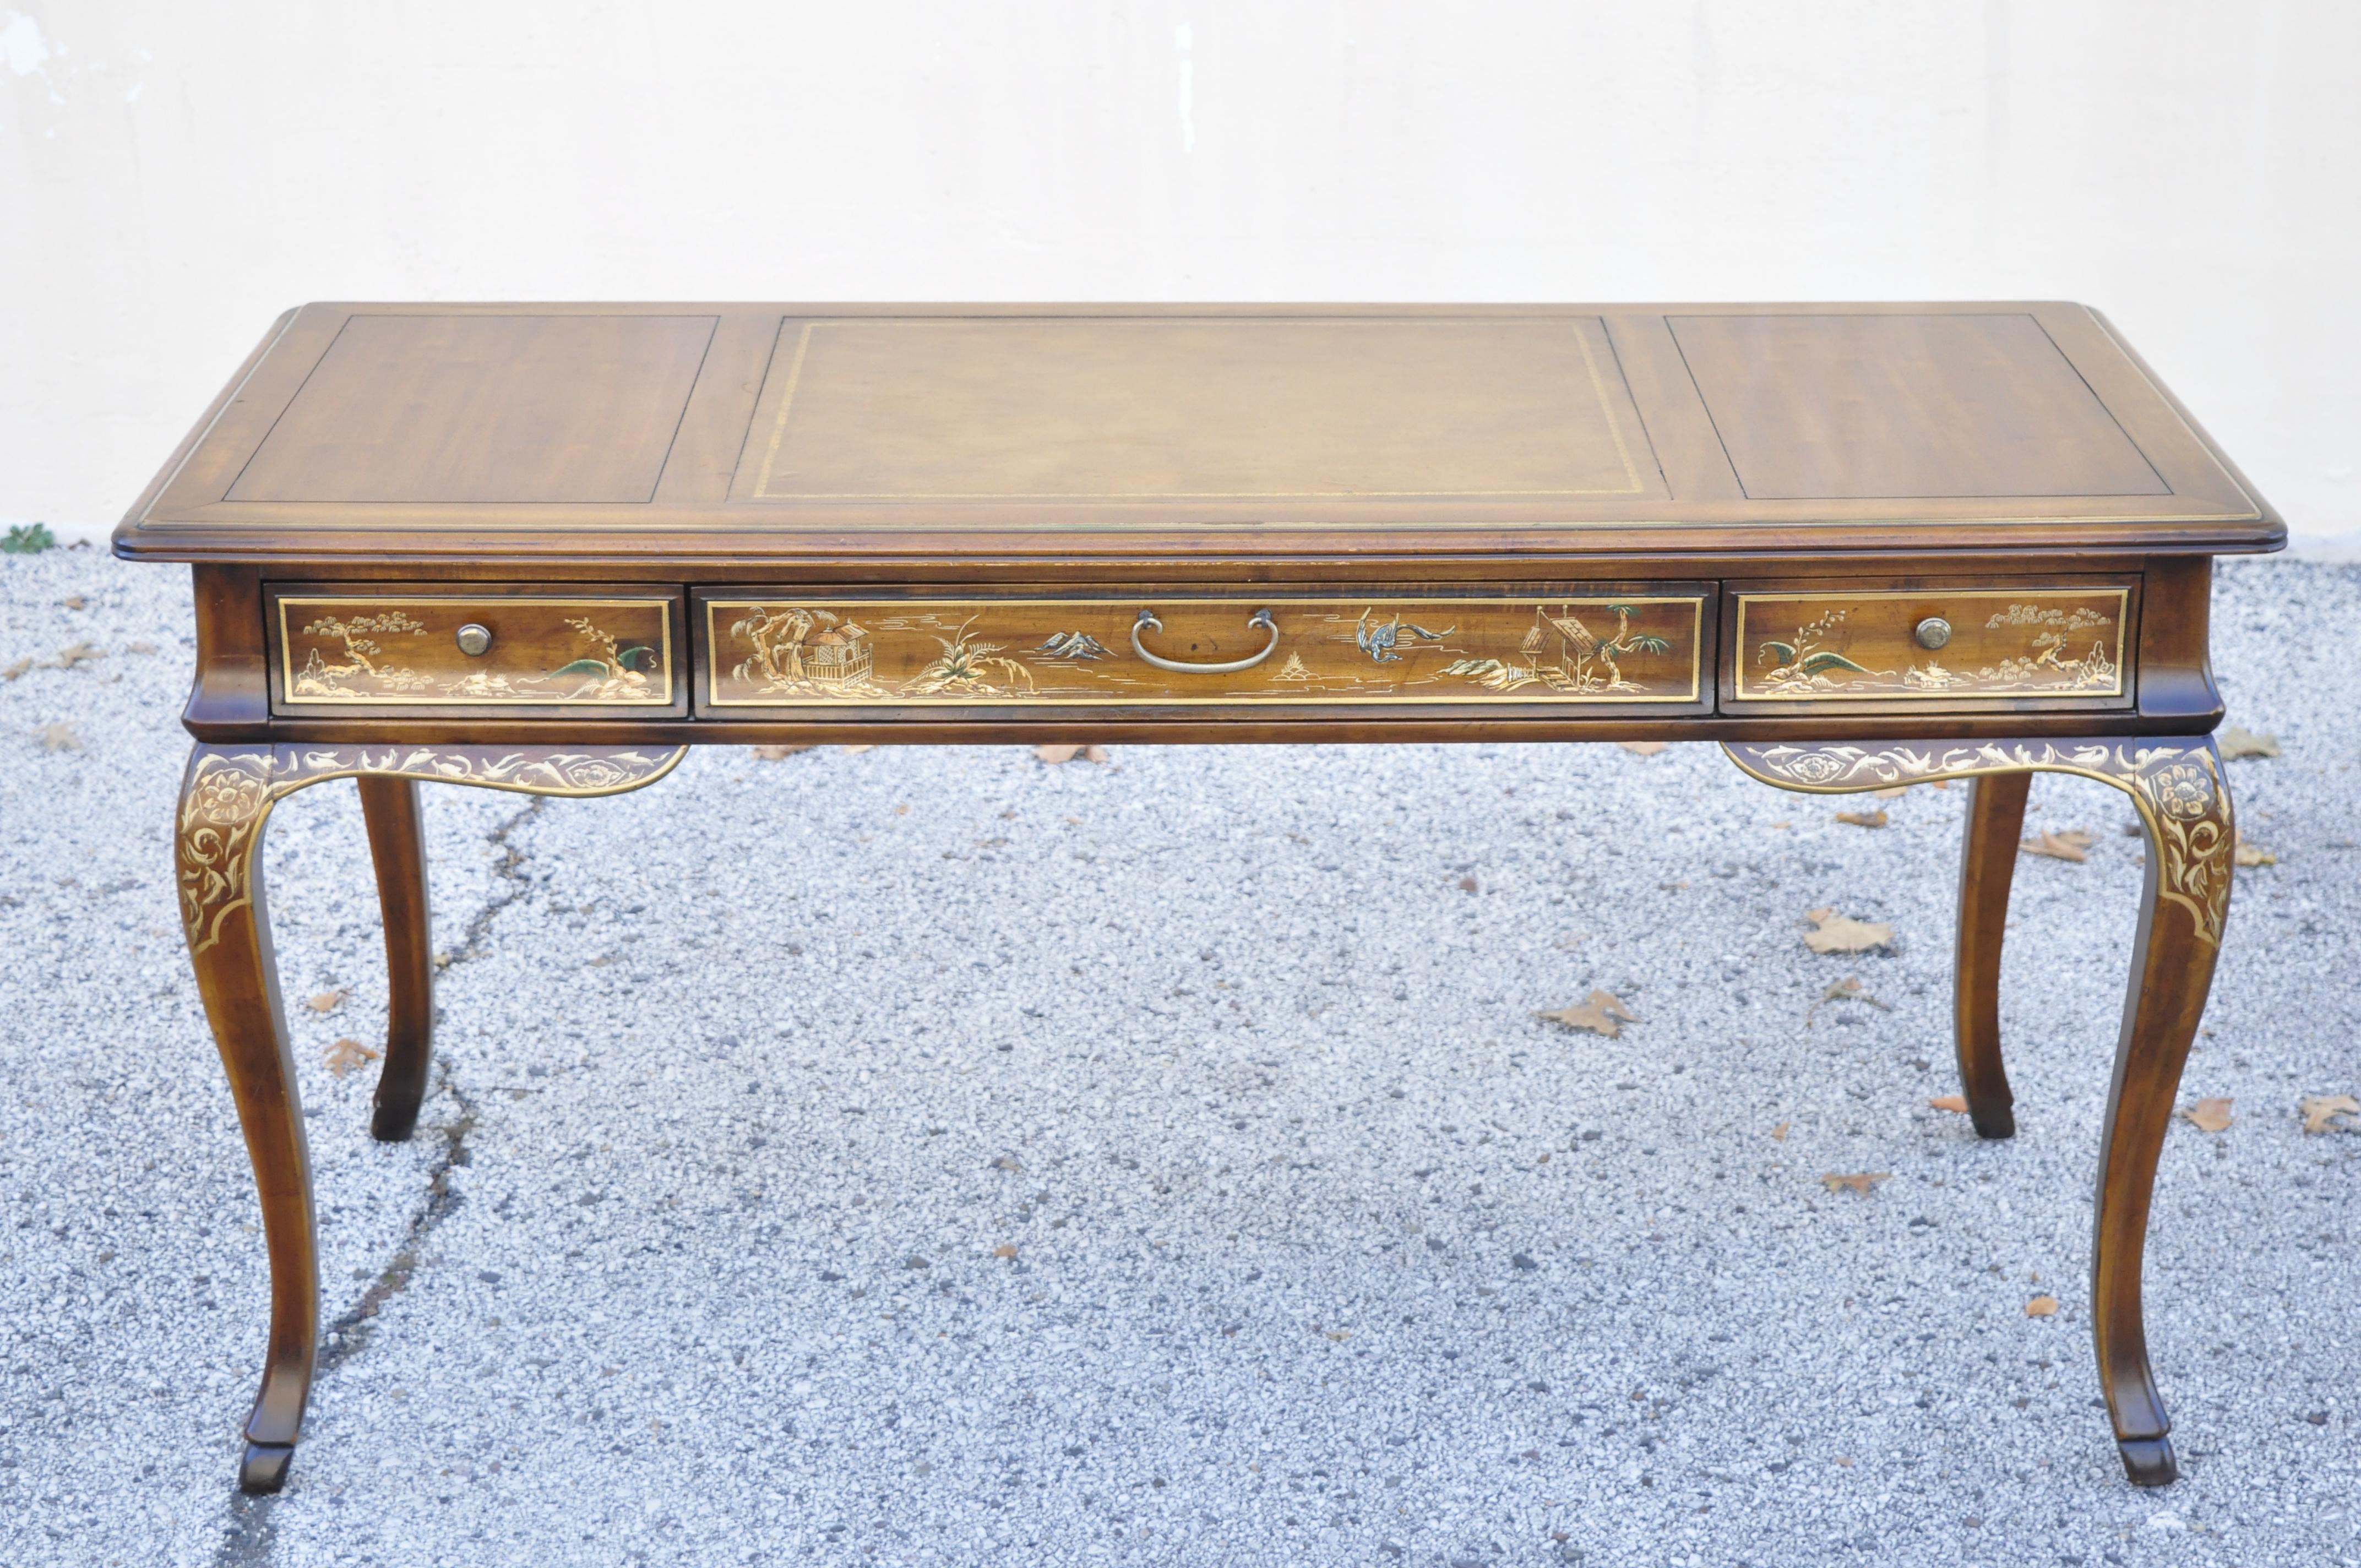 Vintage Drexel Et Cetera Chinoiserie leather top hand painted writing desk. Item features leather top, solid wood construction, beautiful wood grain, hand painted finished back, original label, 3 dovetailed drawers, cabriole legs, quality American